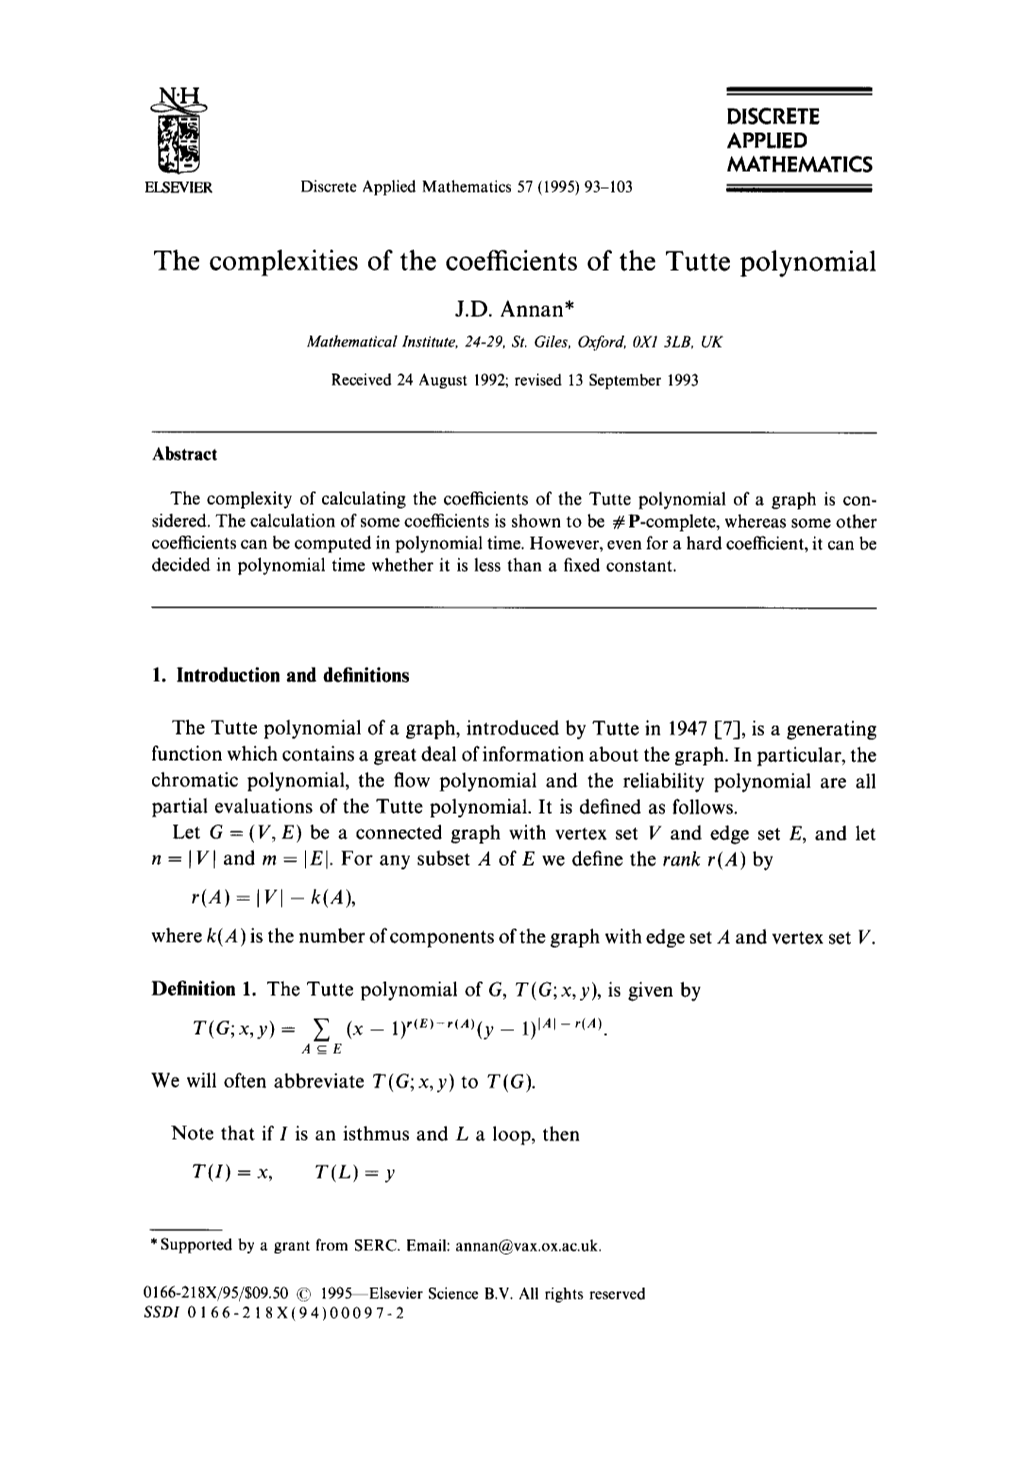 The Complexities of the Coefficients of the Tutte Polynomial